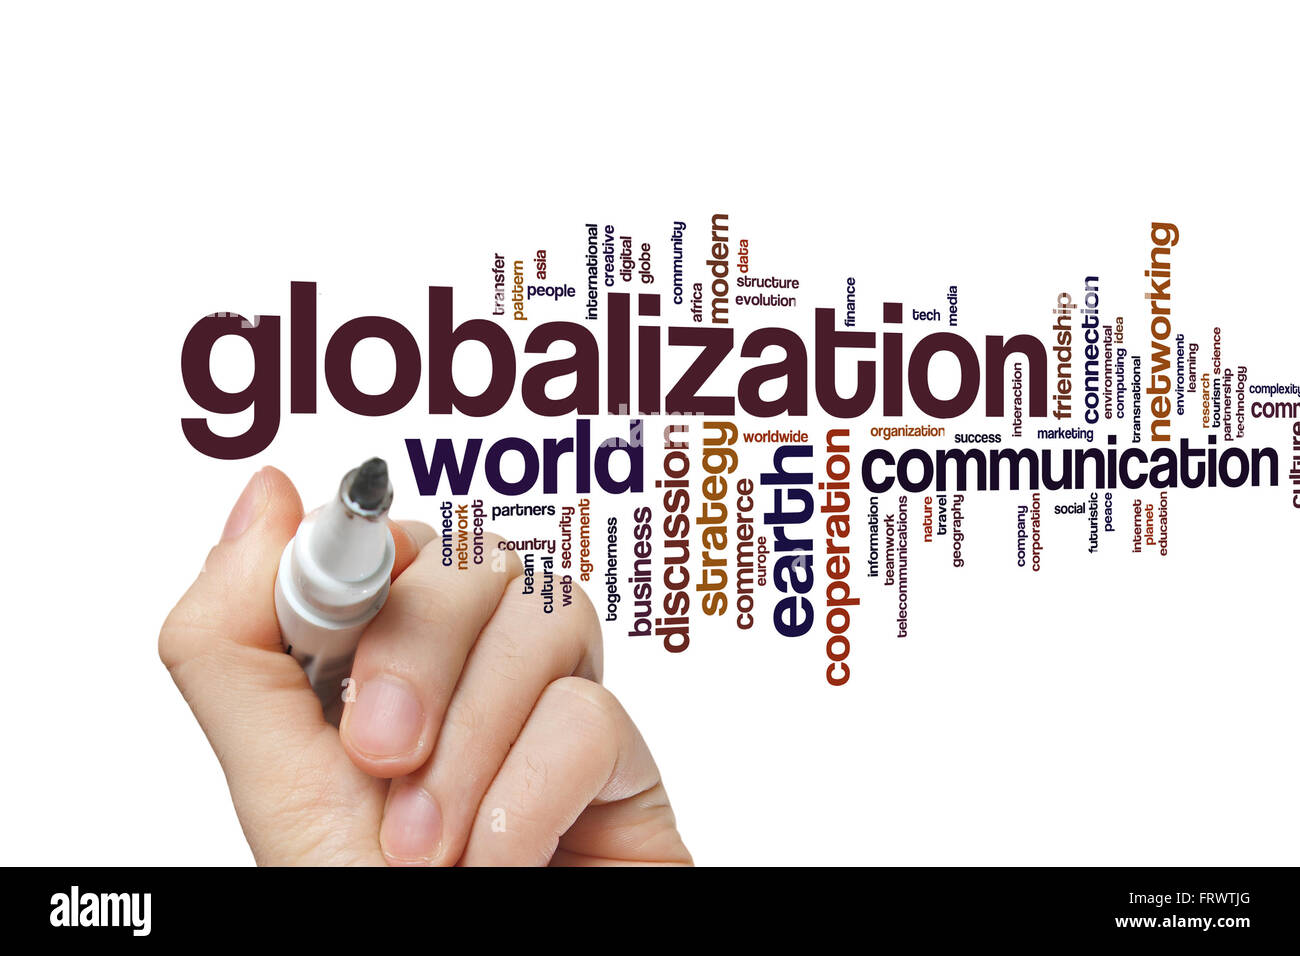 Globalization concept word cloud background Stock Photo